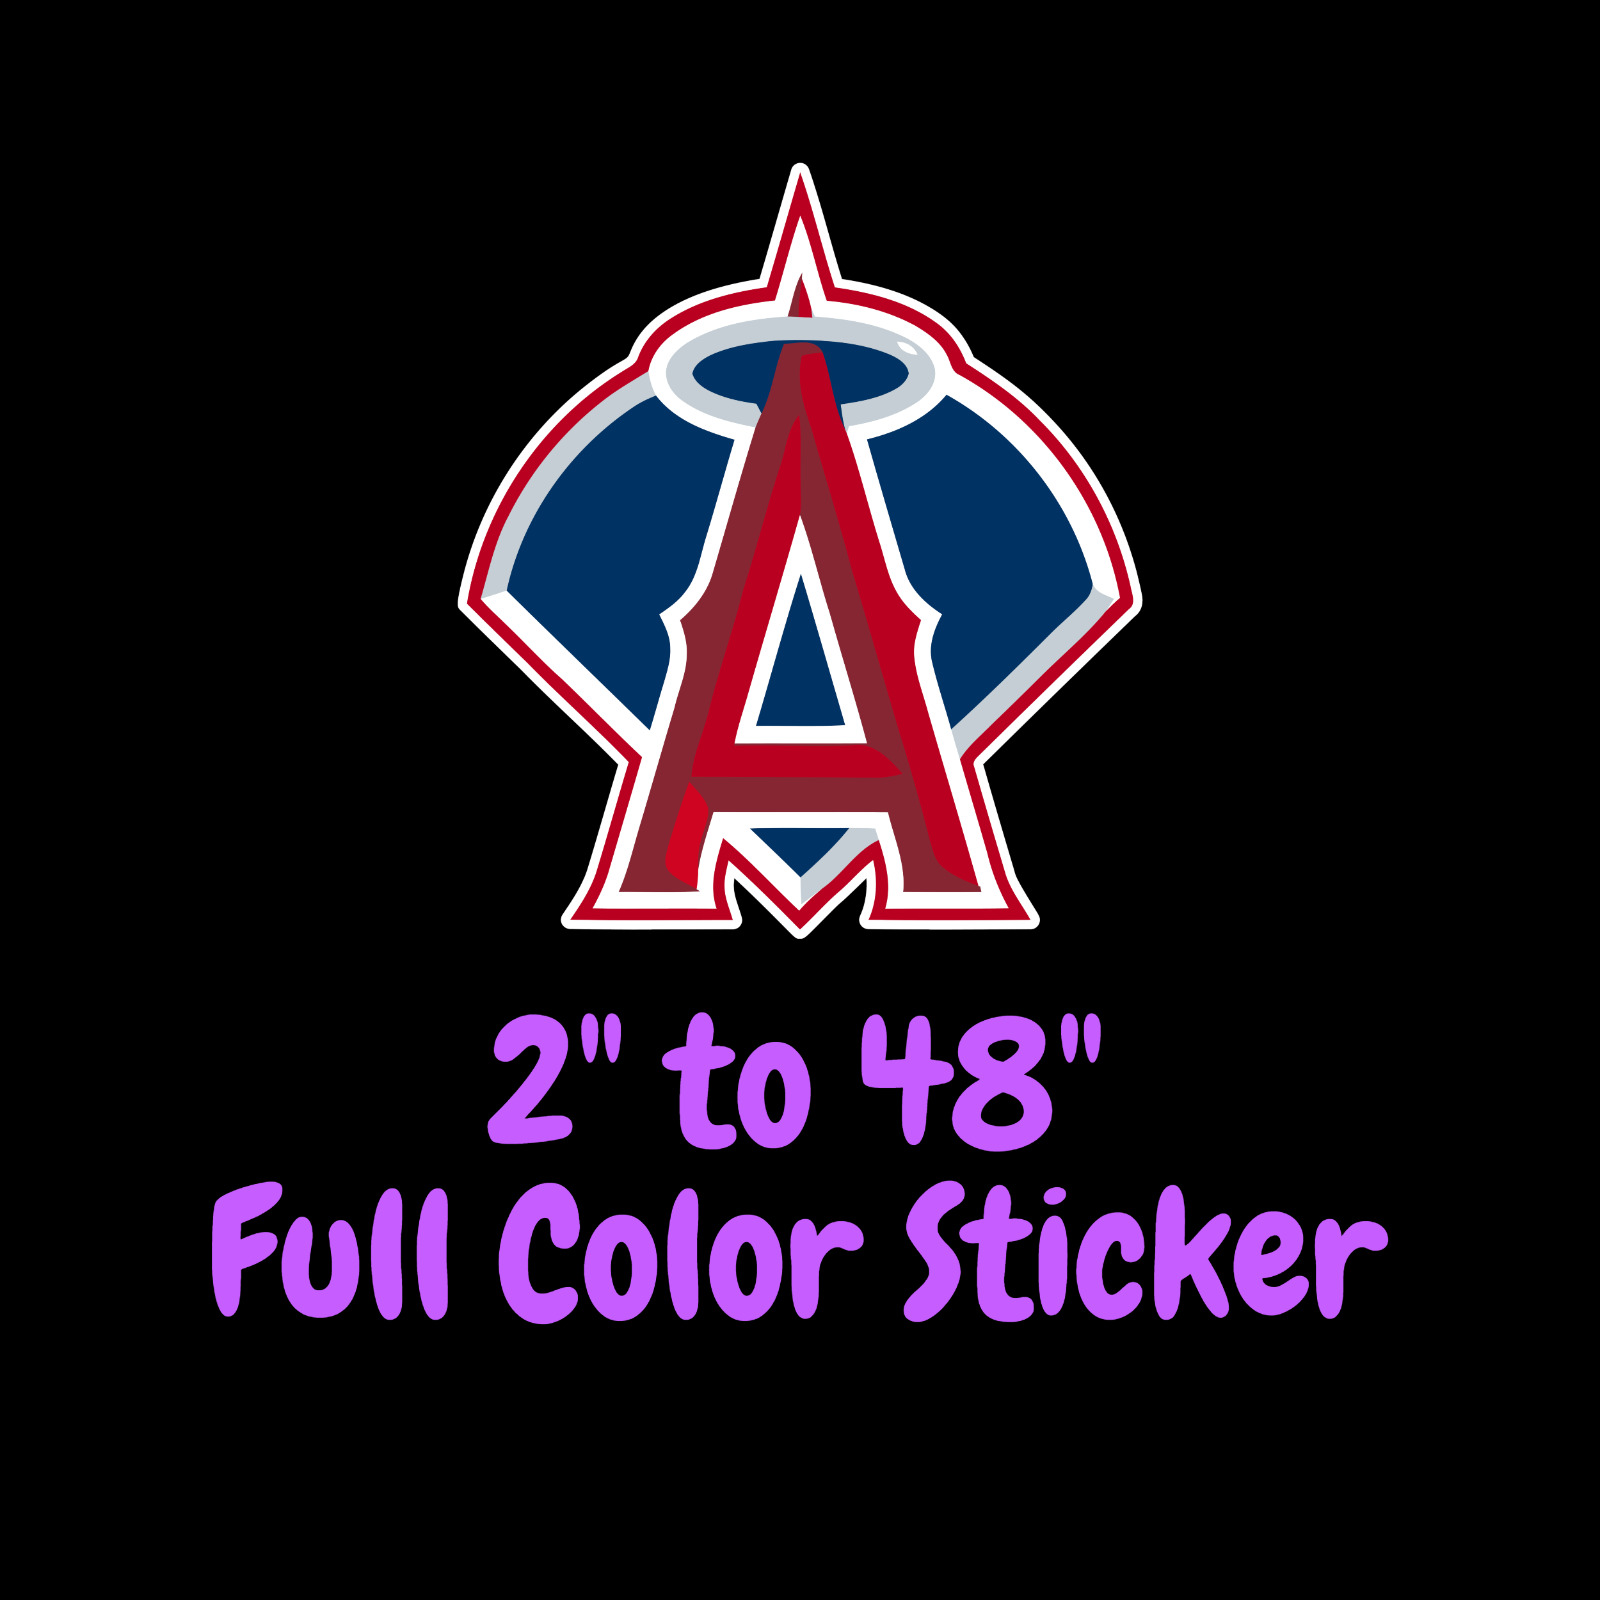 Los Angeles Angels Full Color Vinyl Decal | Hydroflask decal | Cornhole decal 2